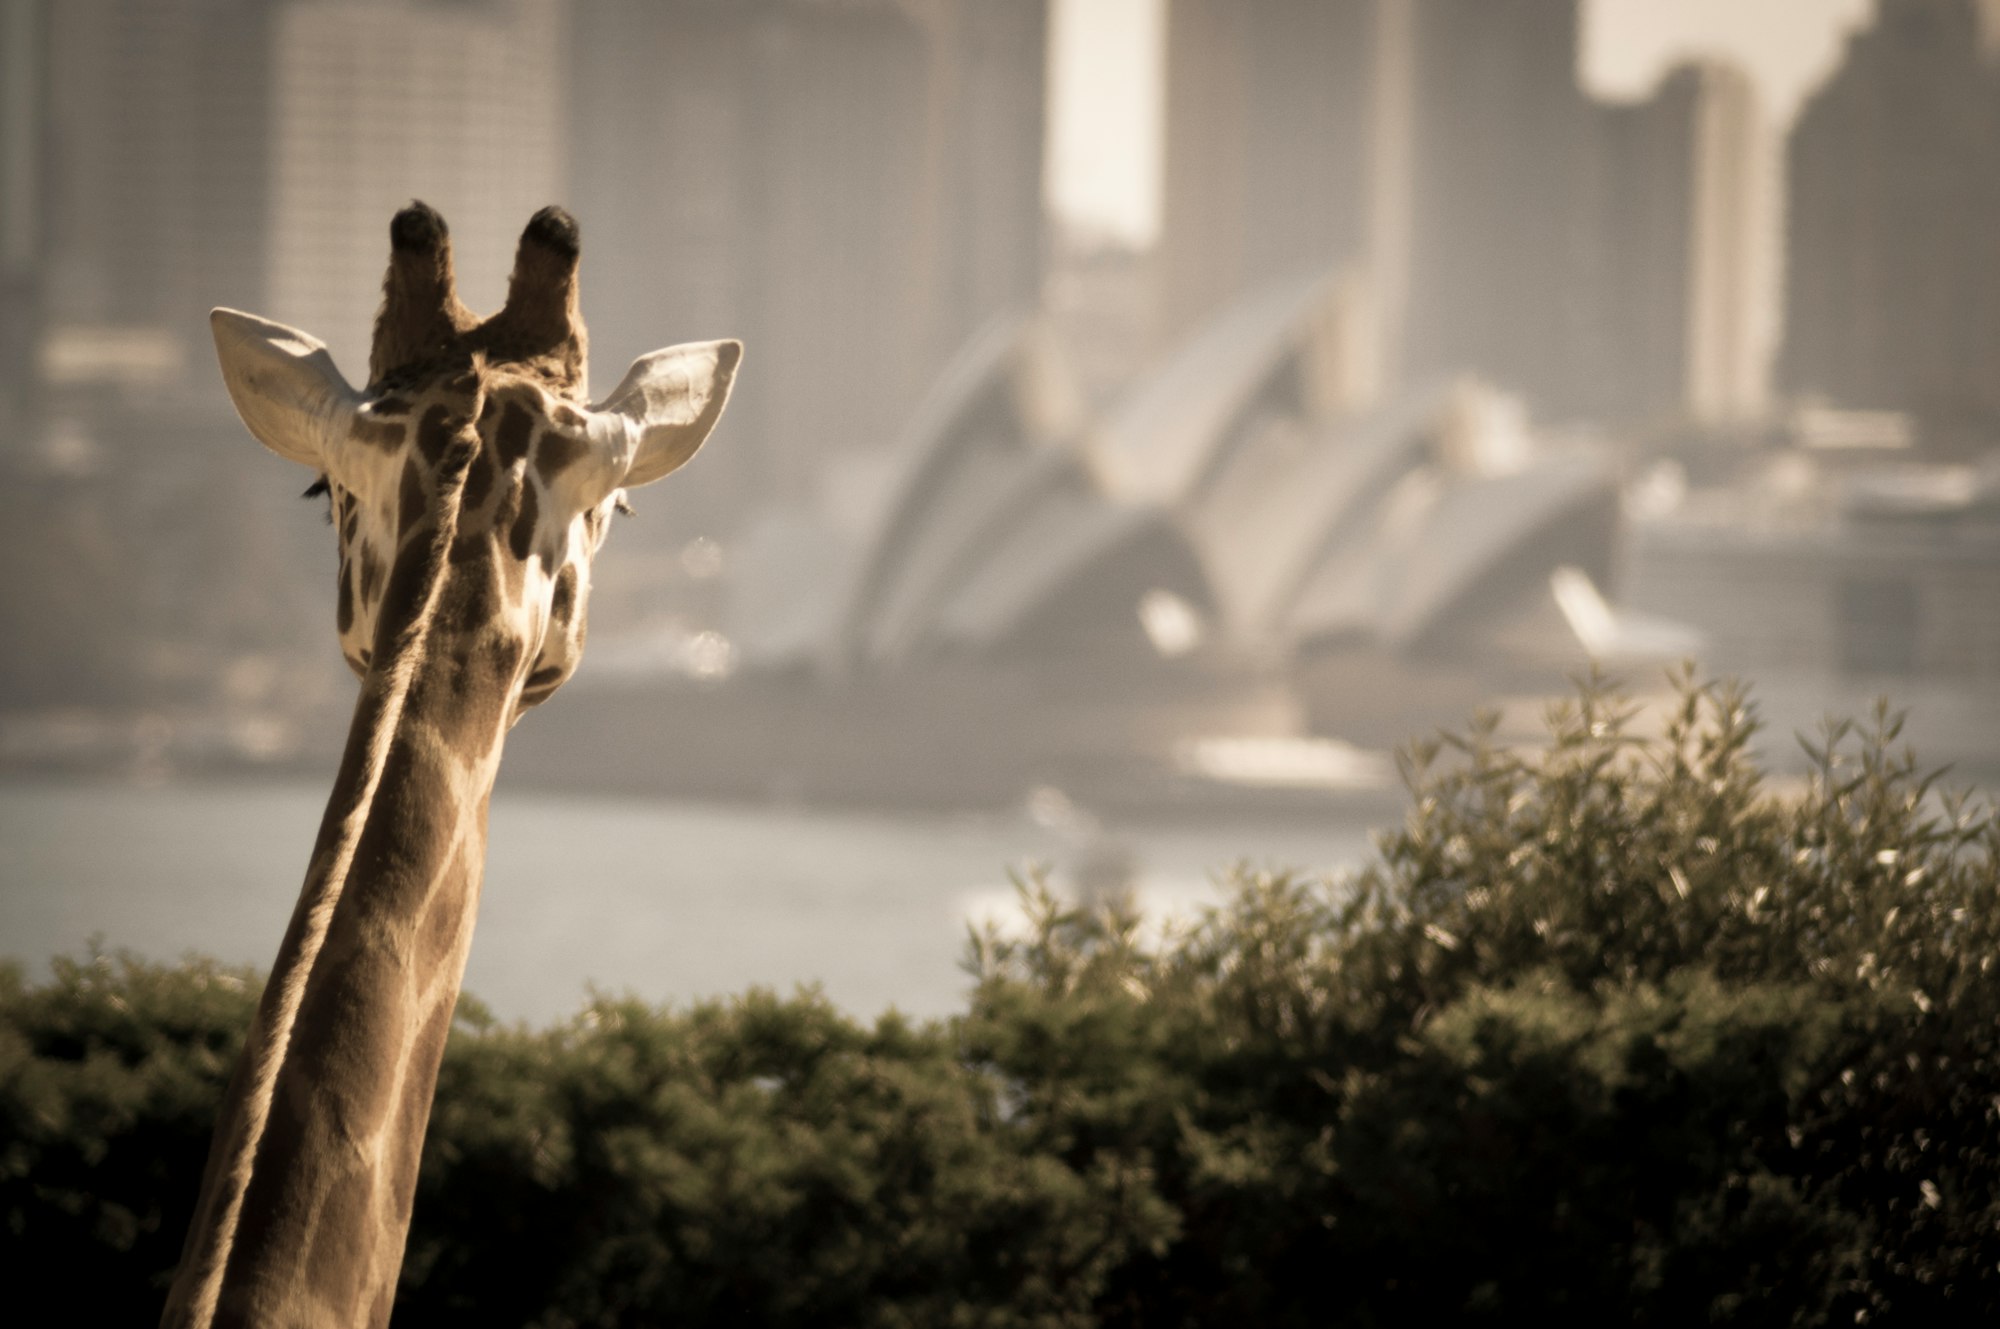 We were on Taronga Zoo, in Sydney, and this Giraffe was quite curious about the Opera House.